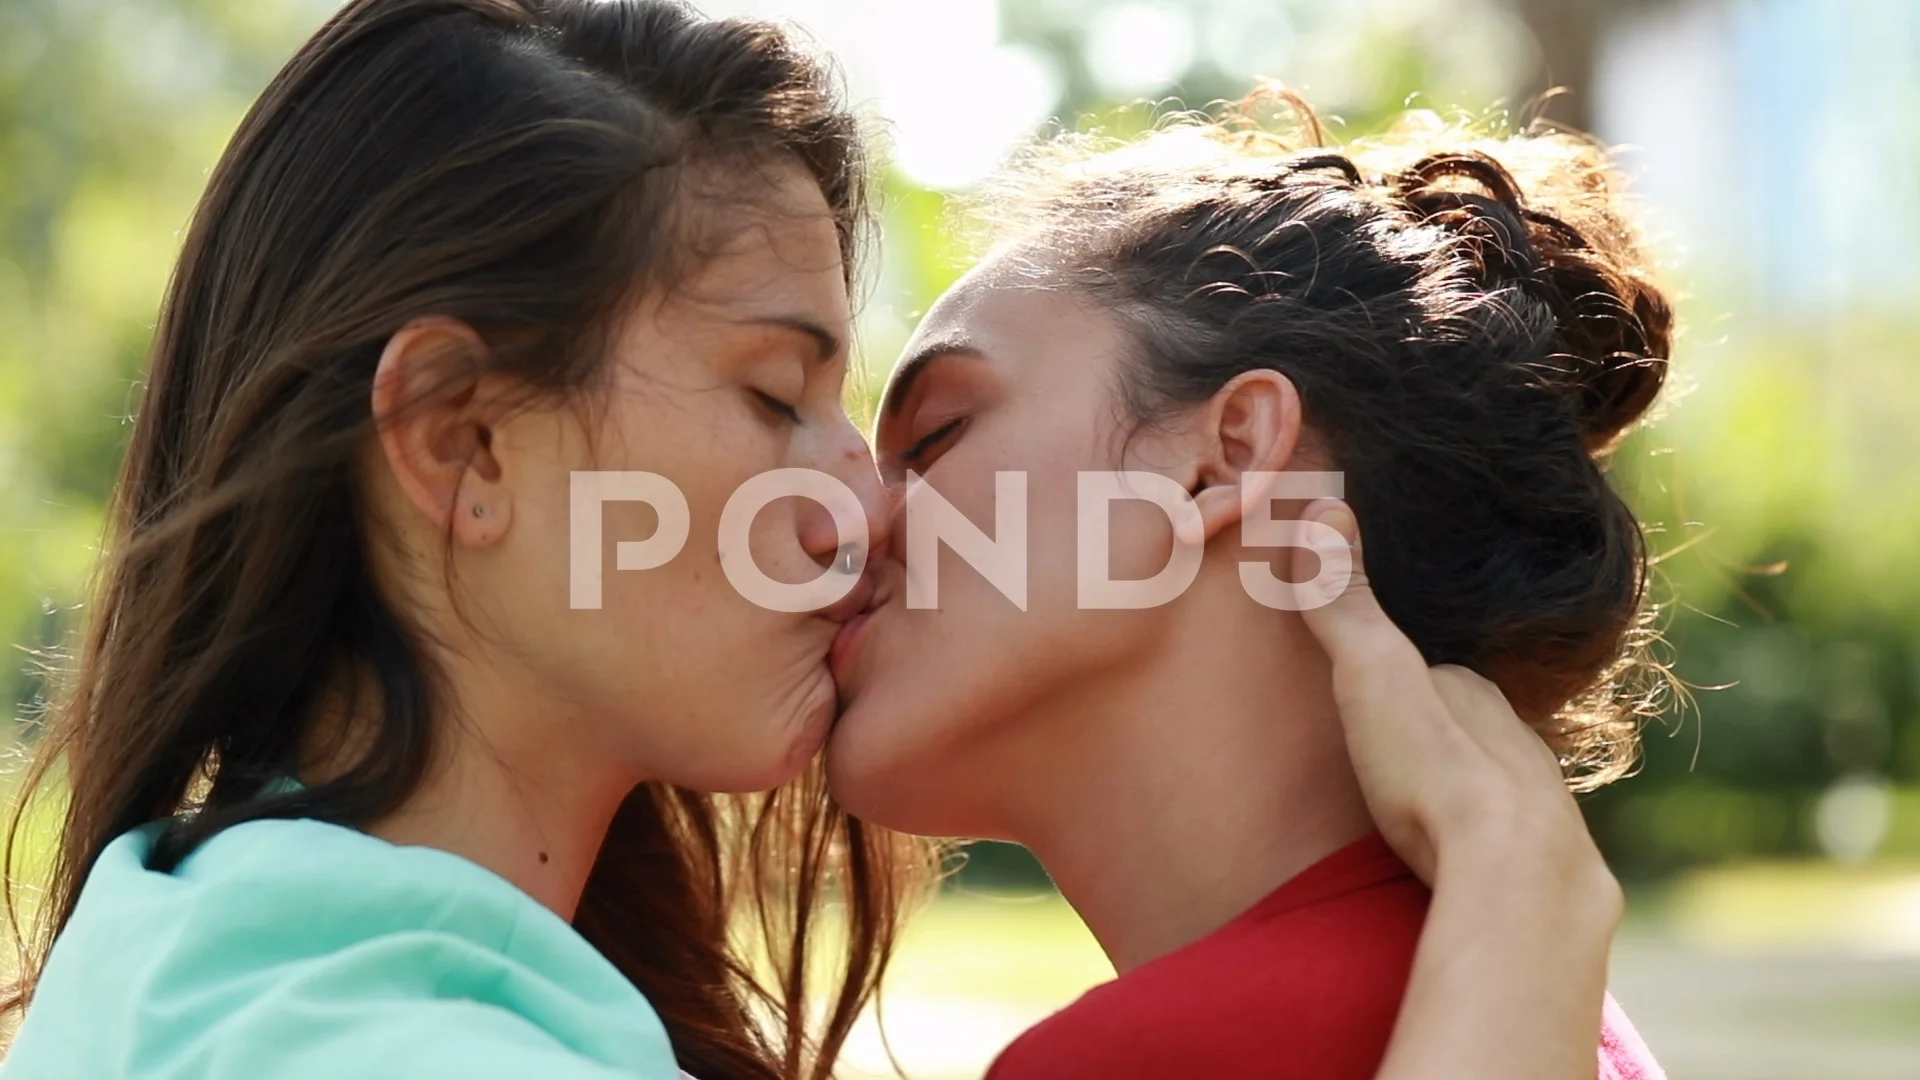 Big Tit Lesbians French Kissing | Sex Pictures Pass